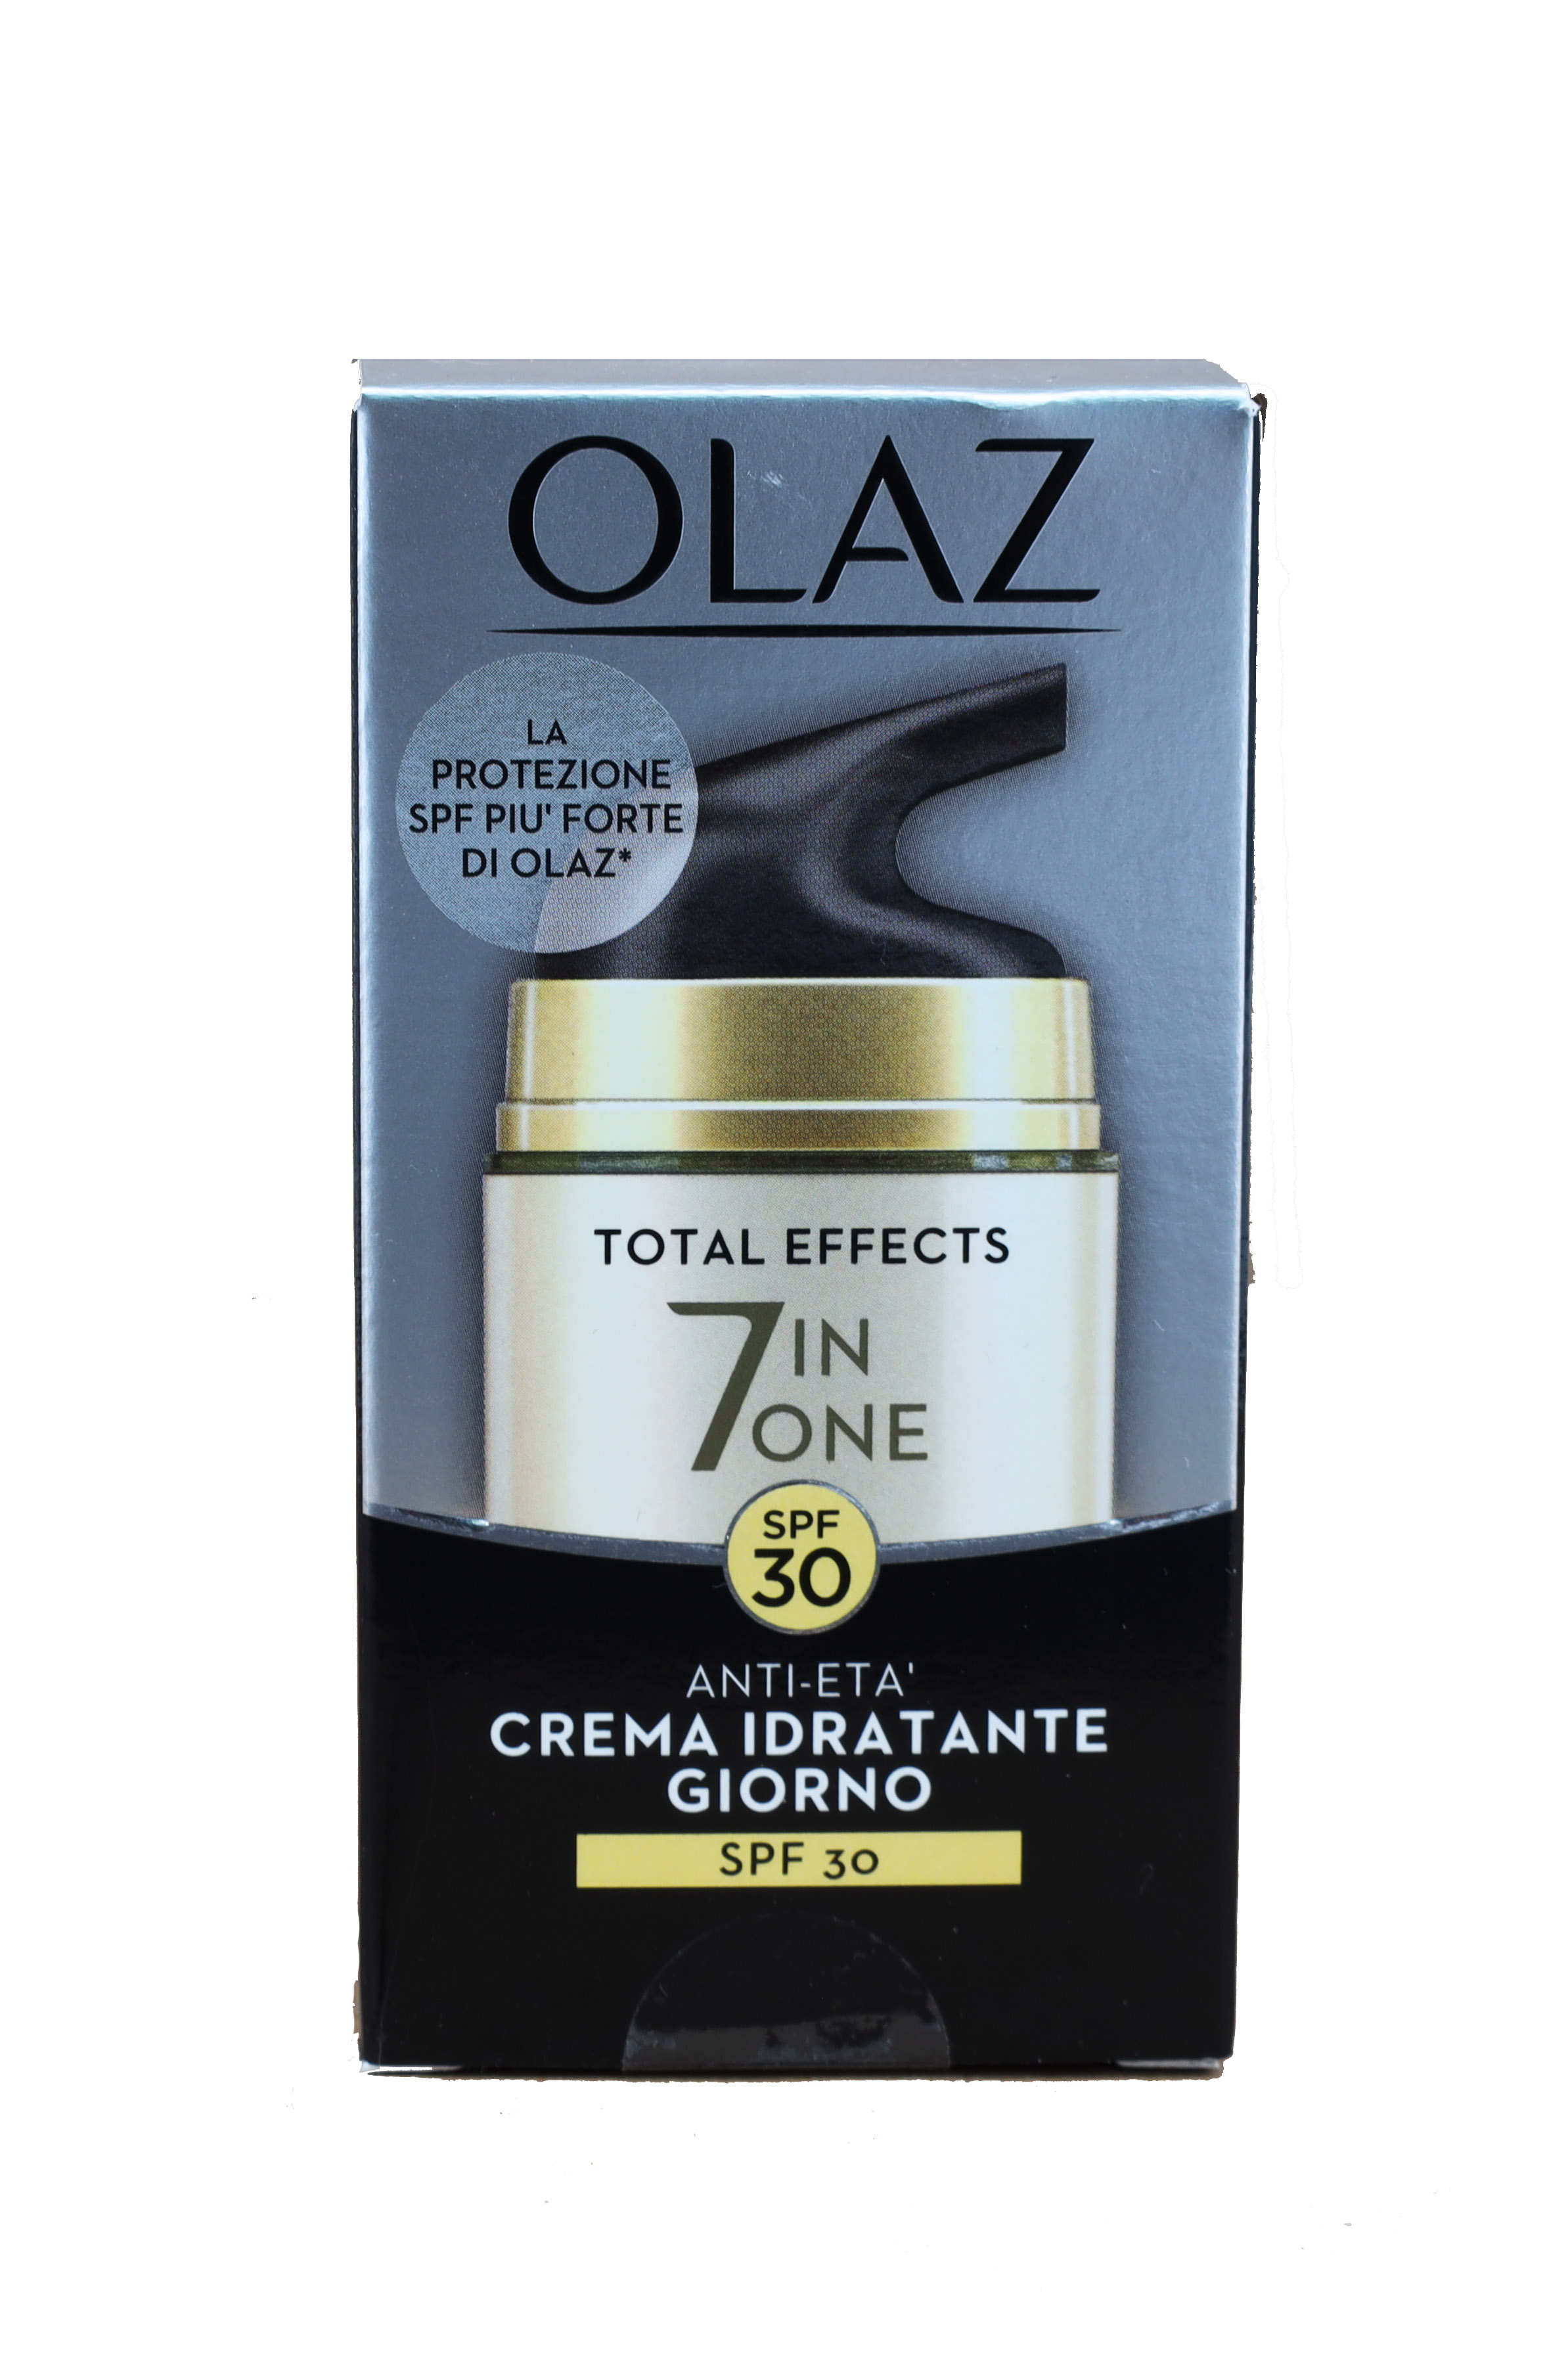 Olaz Total Effects Tagescreme SPF 30 7in1 50ml